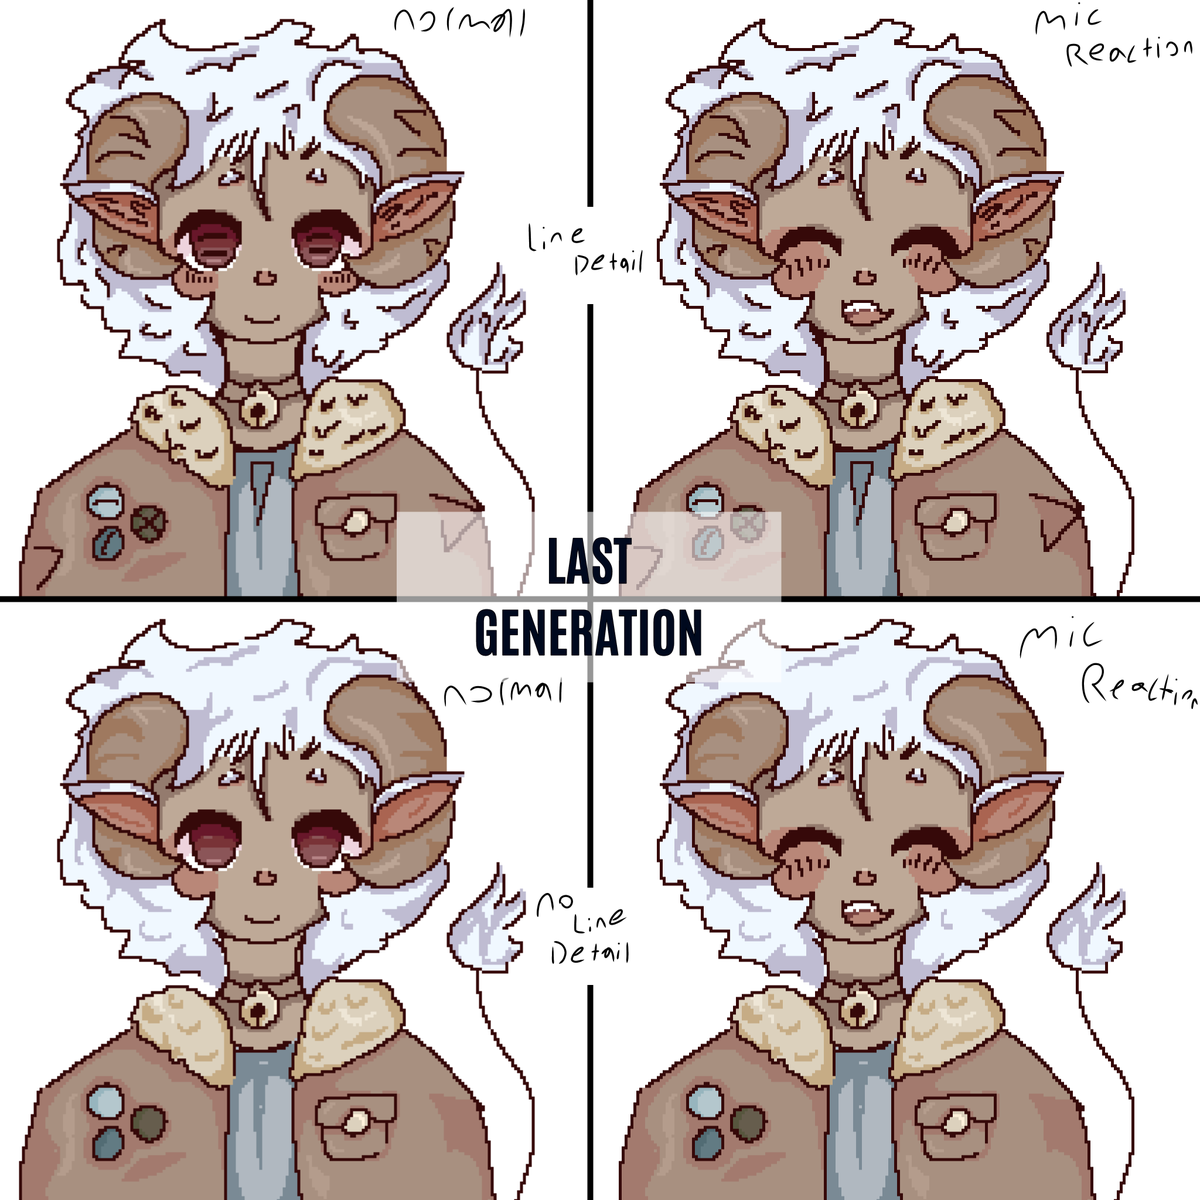 first post <3
!!NOT FOR USE!! - the left side has normal reactions and on the right there are the mic reactions. The top has line detail bottom does not. some people prefer the clean shading without the detail. this is a test draw/commission just for example - !!NOT FOR USE!!